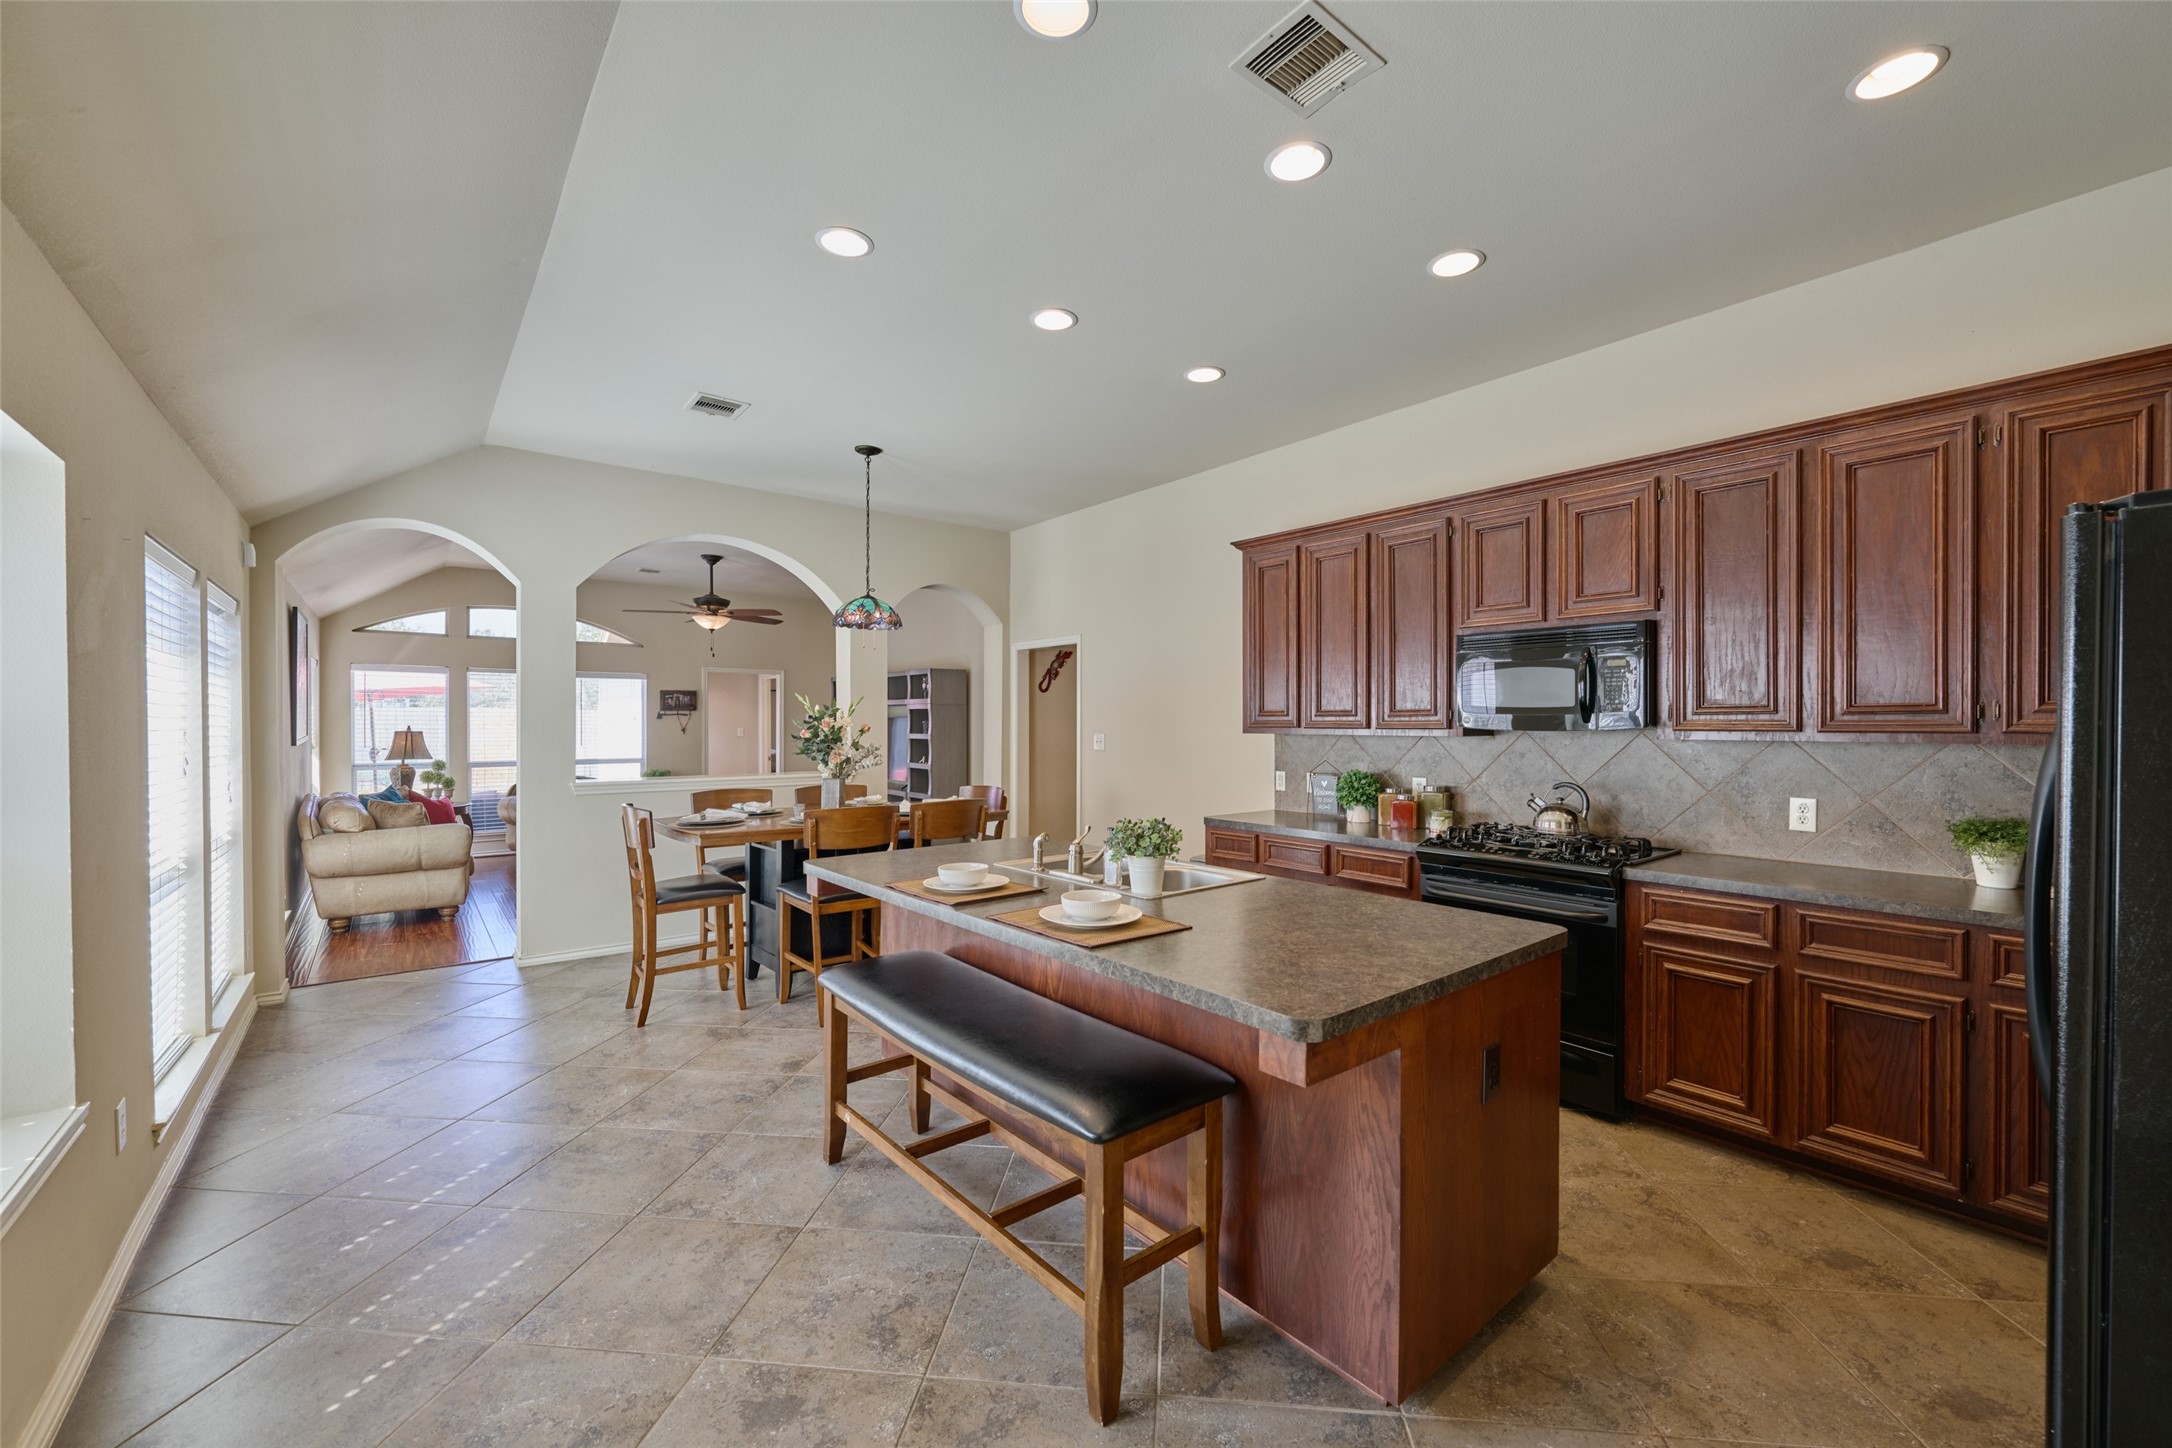 Amazing kitchen layout features an extensive island, gabled ceiling, 19